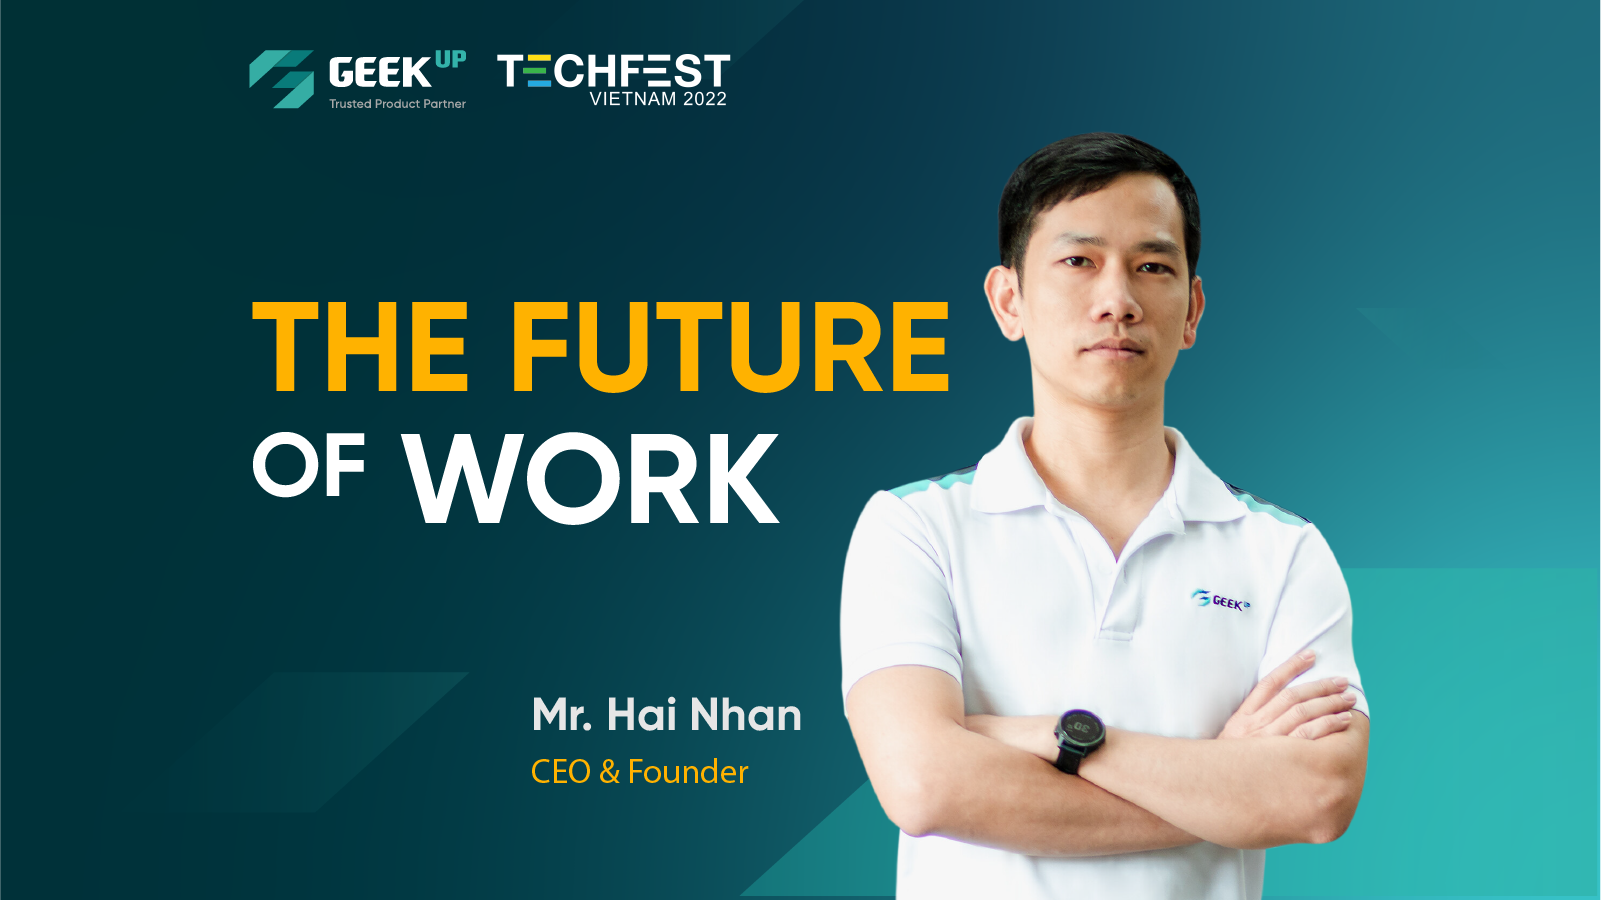 CEO GEEK Up - bringing “The Future of Work” to TECHFEST 2022